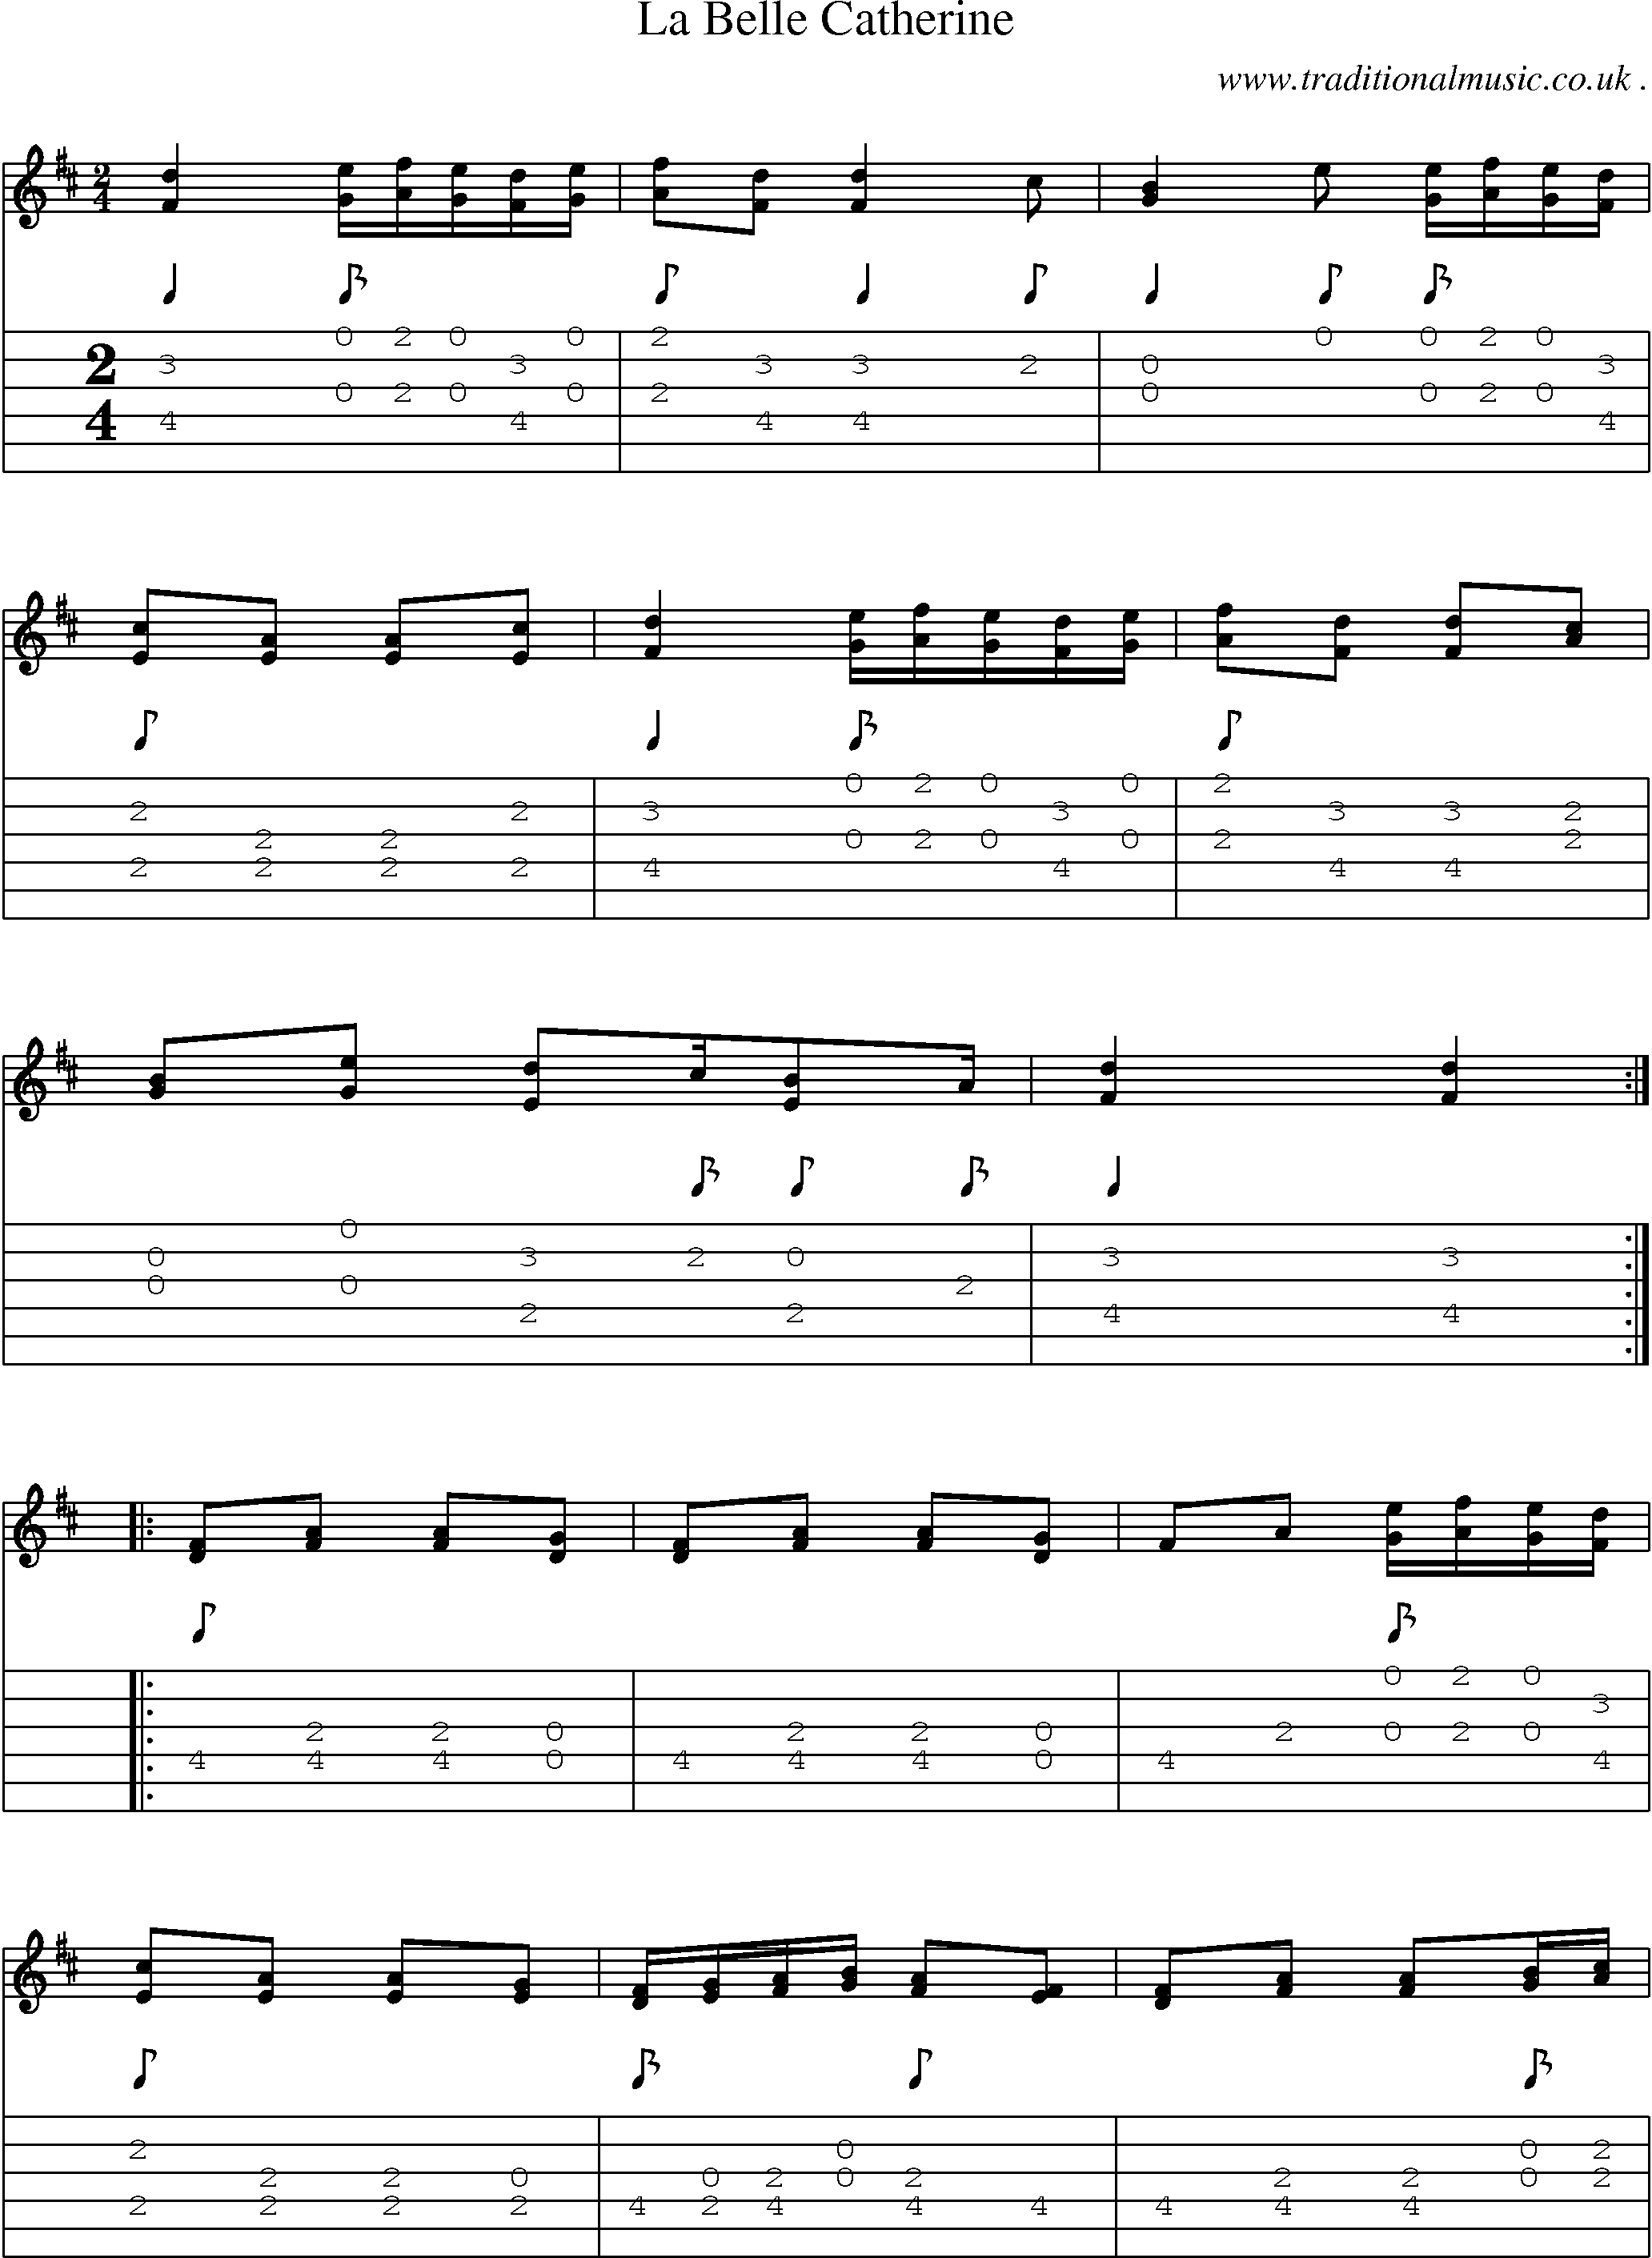 Music Score and Guitar Tabs for La Belle Catherine